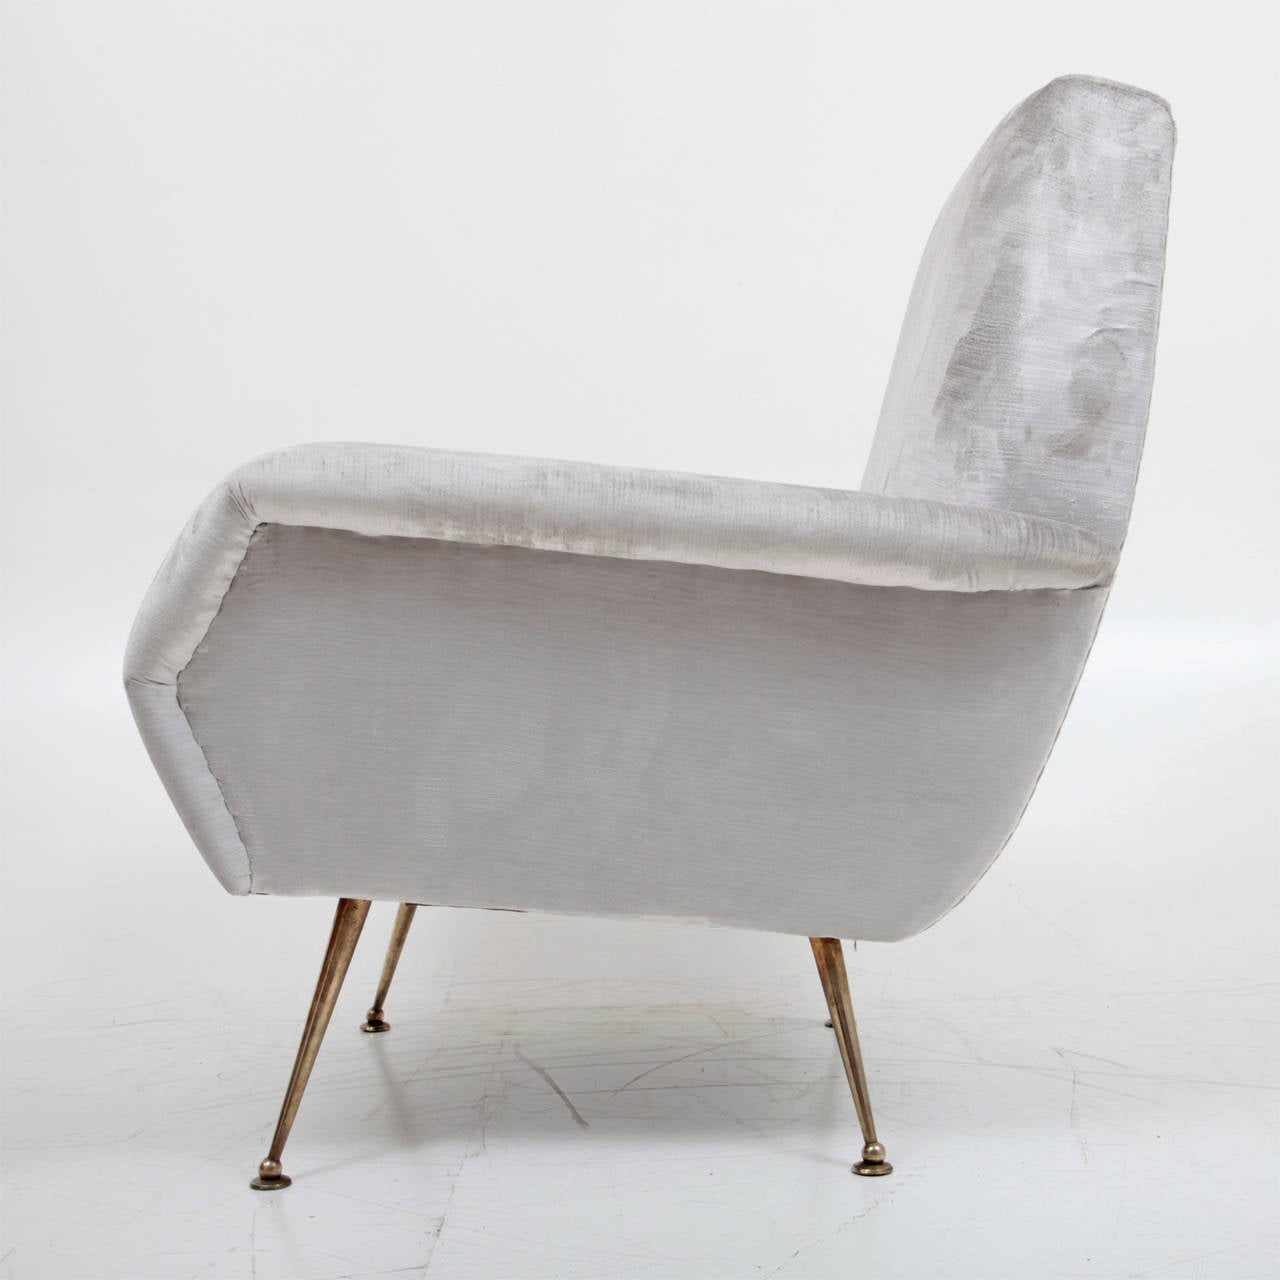 20th Century Italian Armchair by Frattini from the 1970s